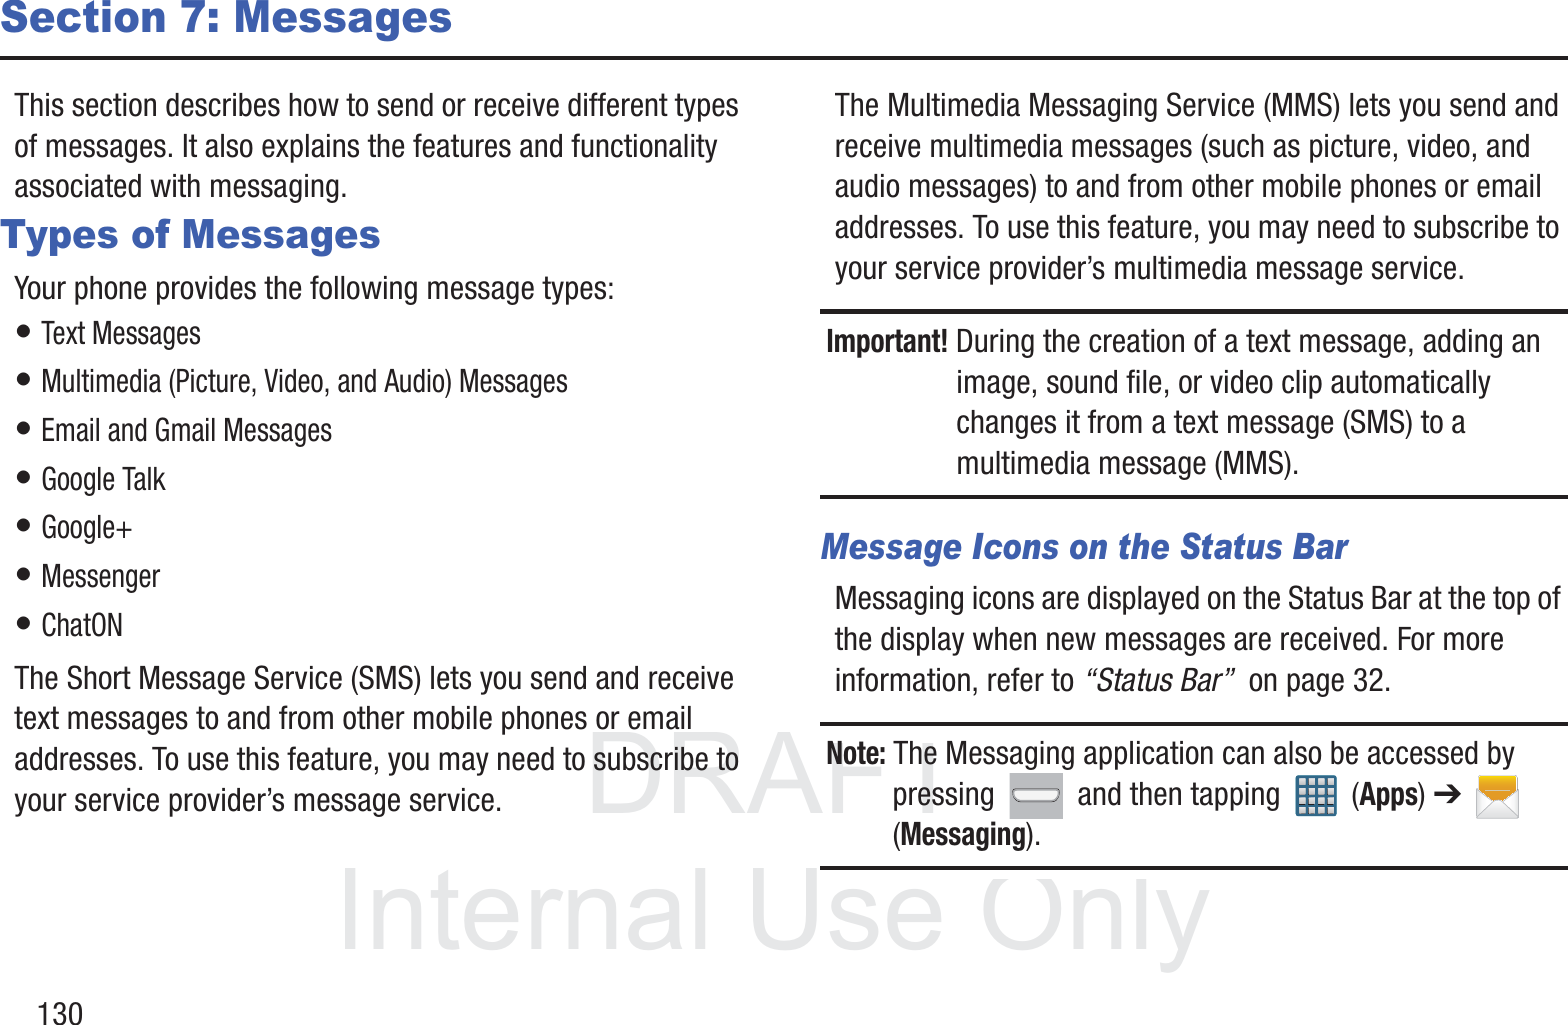 DRAFT InternalUse Only130Section 7: MessagesThis section describes how to send or receive different types of messages. It also explains the features and functionality associated with messaging.Types of MessagesYour phone provides the following message types:• Text Messages • Multimedia (Picture, Video, and Audio) Messages • Email and Gmail Messages• Google Talk• Google+• Messenger• ChatONThe Short Message Service (SMS) lets you send and receive text messages to and from other mobile phones or email addresses. To use this feature, you may need to subscribe to your service provider’s message service.The Multimedia Messaging Service (MMS) lets you send and receive multimedia messages (such as picture, video, and audio messages) to and from other mobile phones or email addresses. To use this feature, you may need to subscribe to your service provider’s multimedia message service.Important! During the creation of a text message, adding an image, sound file, or video clip automatically changes it from a text message (SMS) to a multimedia message (MMS).Message Icons on the Status BarMessaging icons are displayed on the Status Bar at the top of the display when new messages are received. For more information, refer to “Status Bar”  on page 32.Note: The Messaging application can also be accessed by pressing   and then tapping   (Apps) ➔  (Messaging).